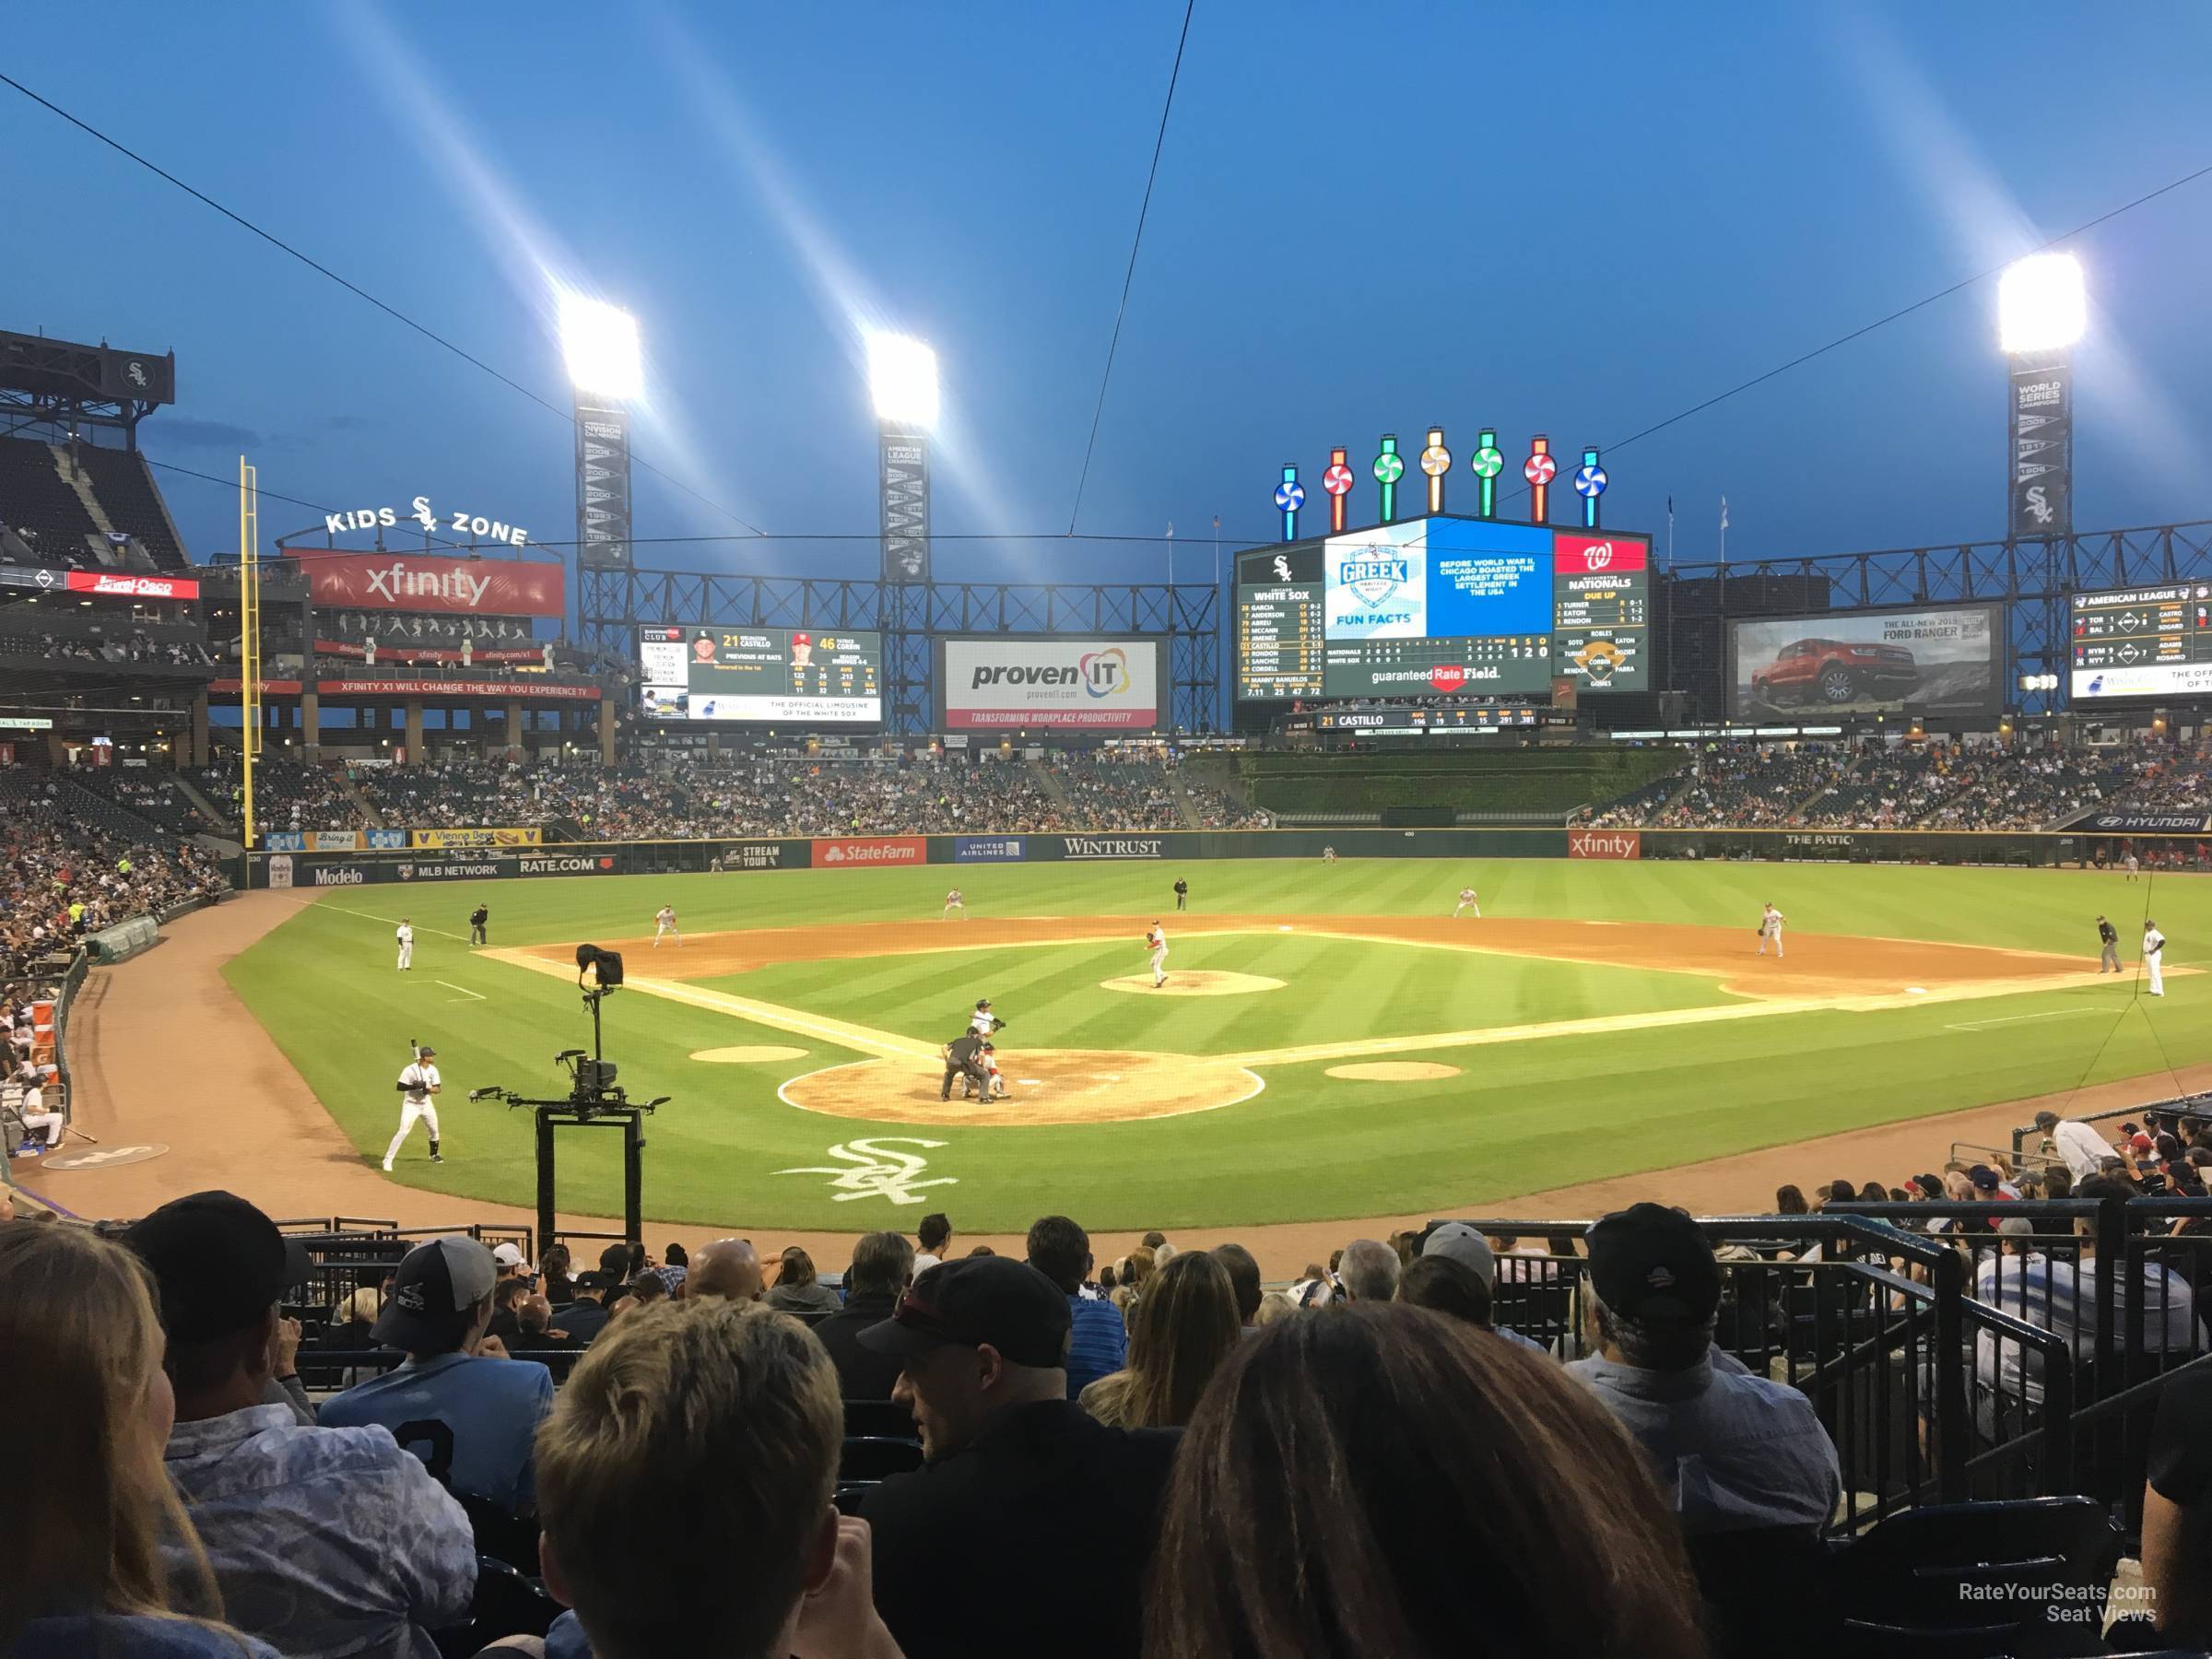 The 300s Reviews: Guaranteed Rate Field, Home of the Chicago White Sox